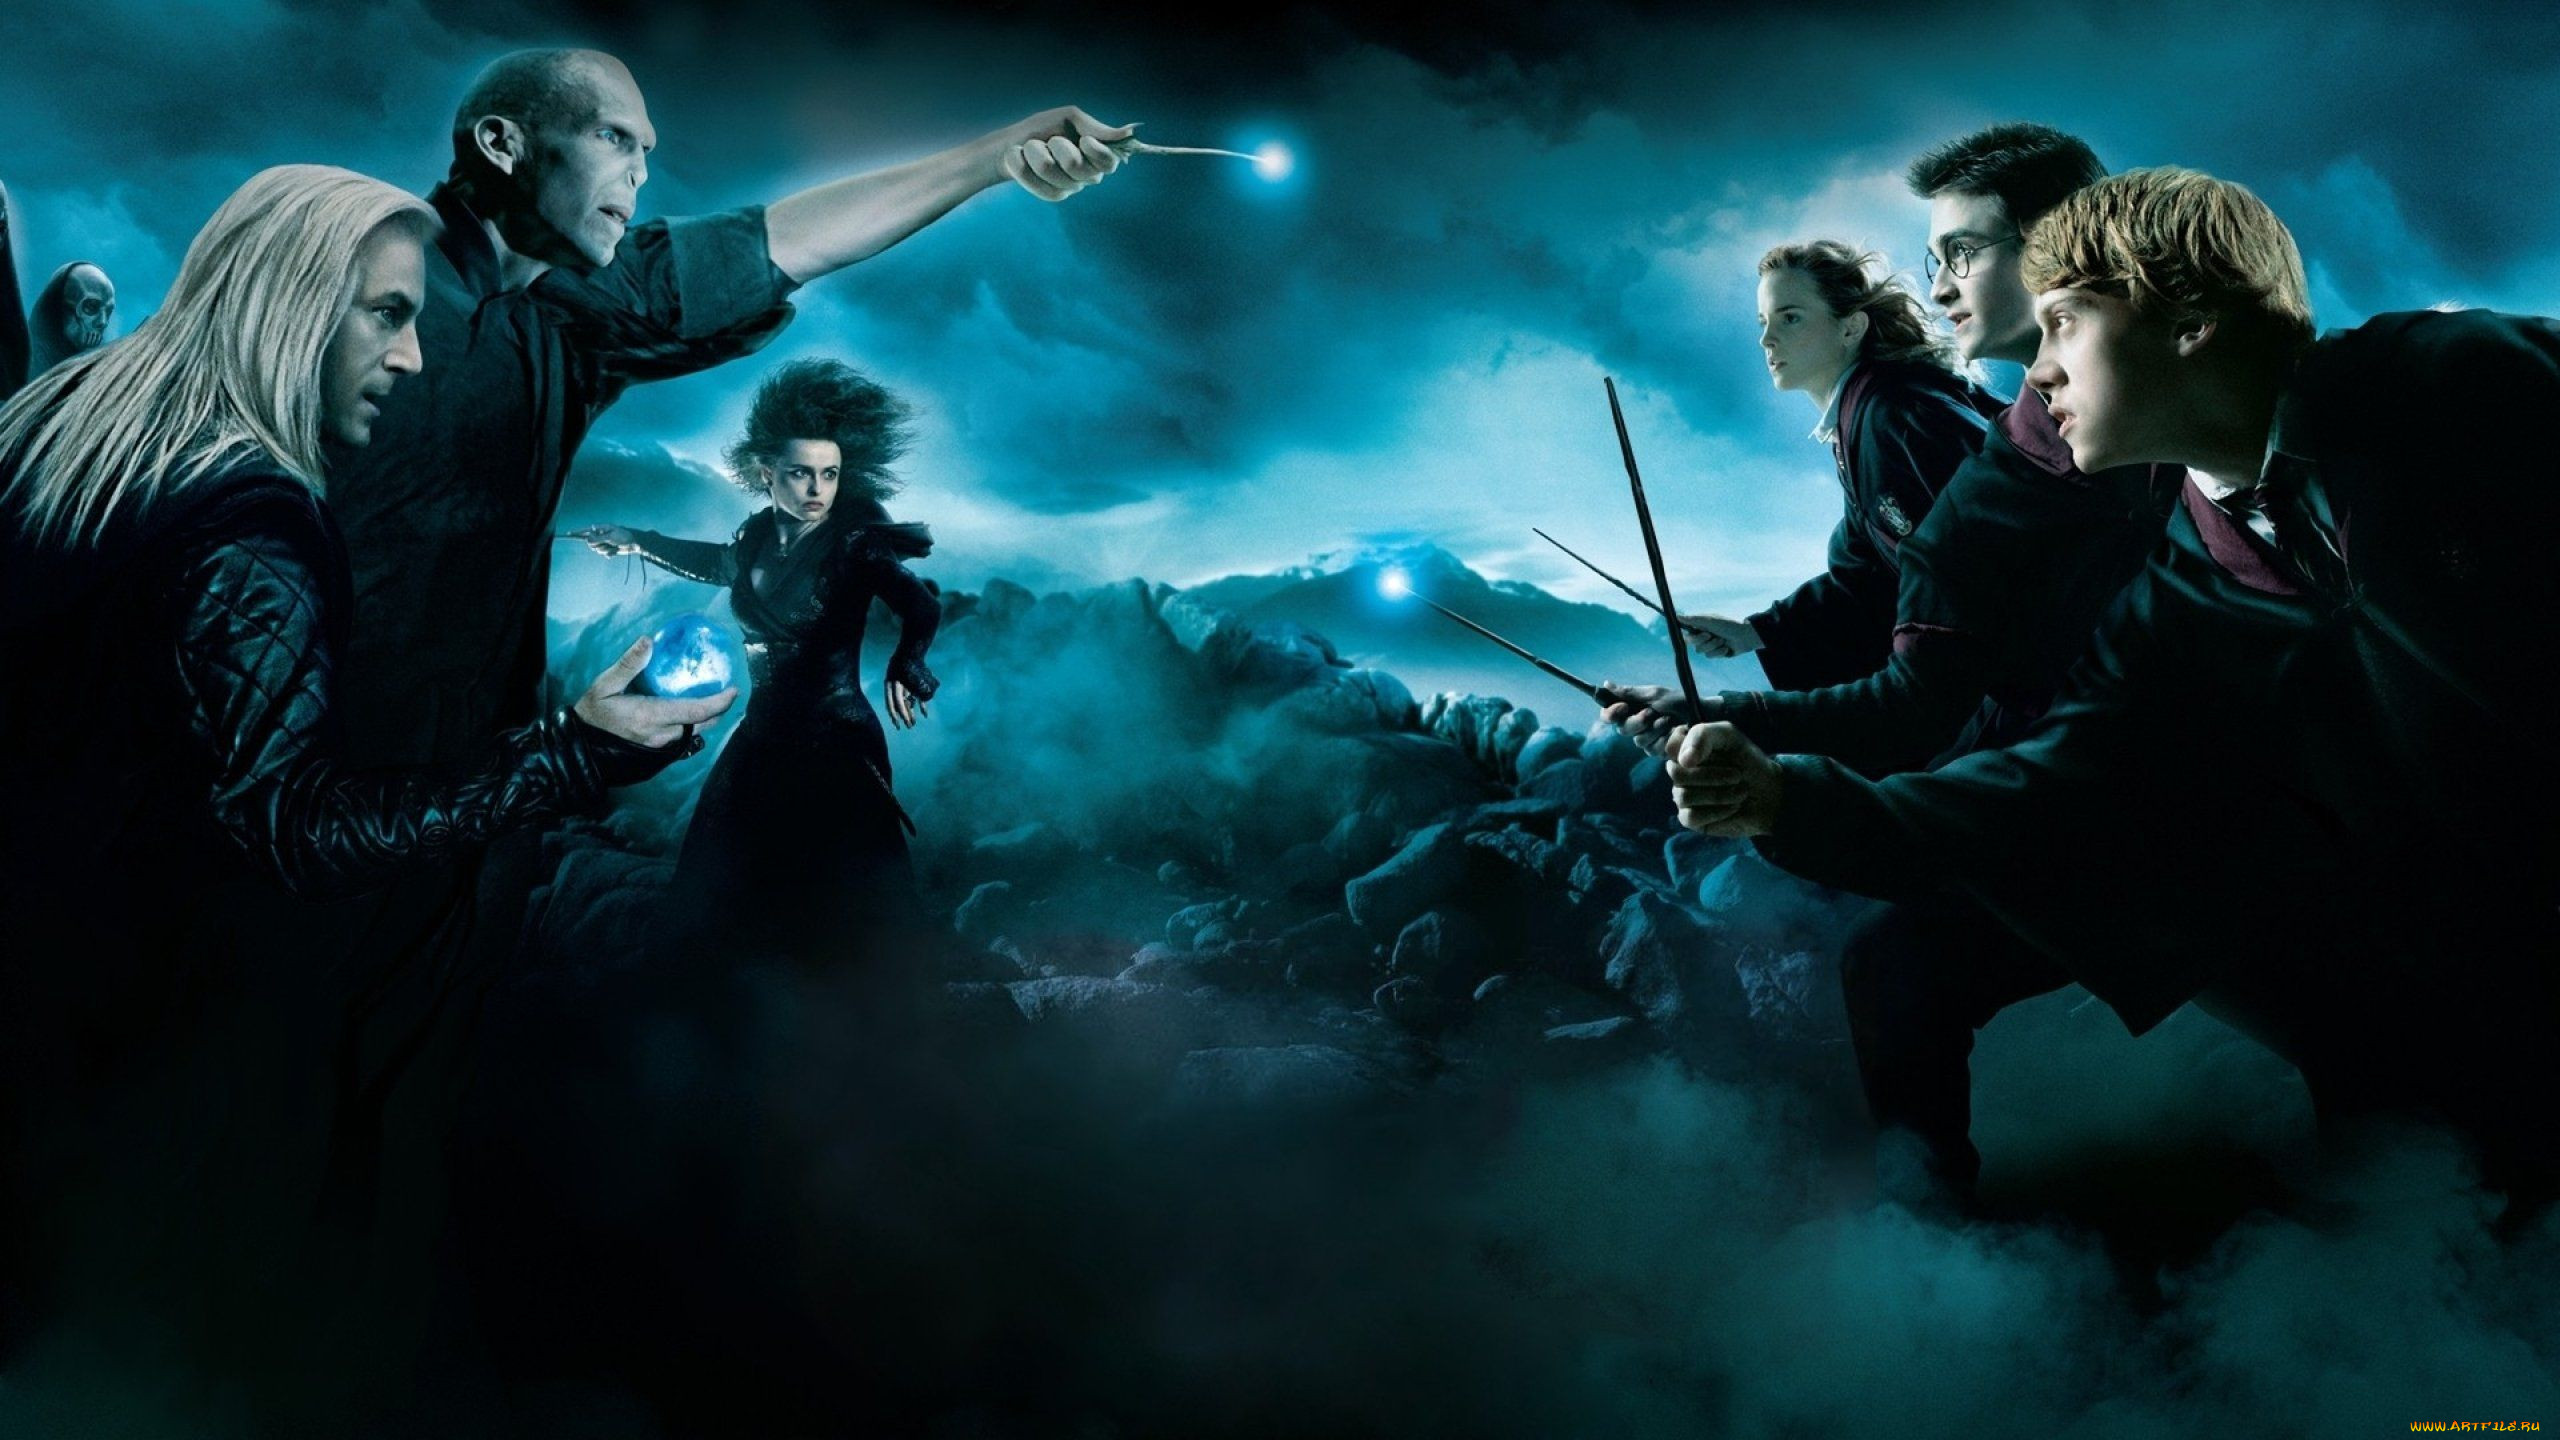  , harry potter and the deathly hallows,  part ii, 